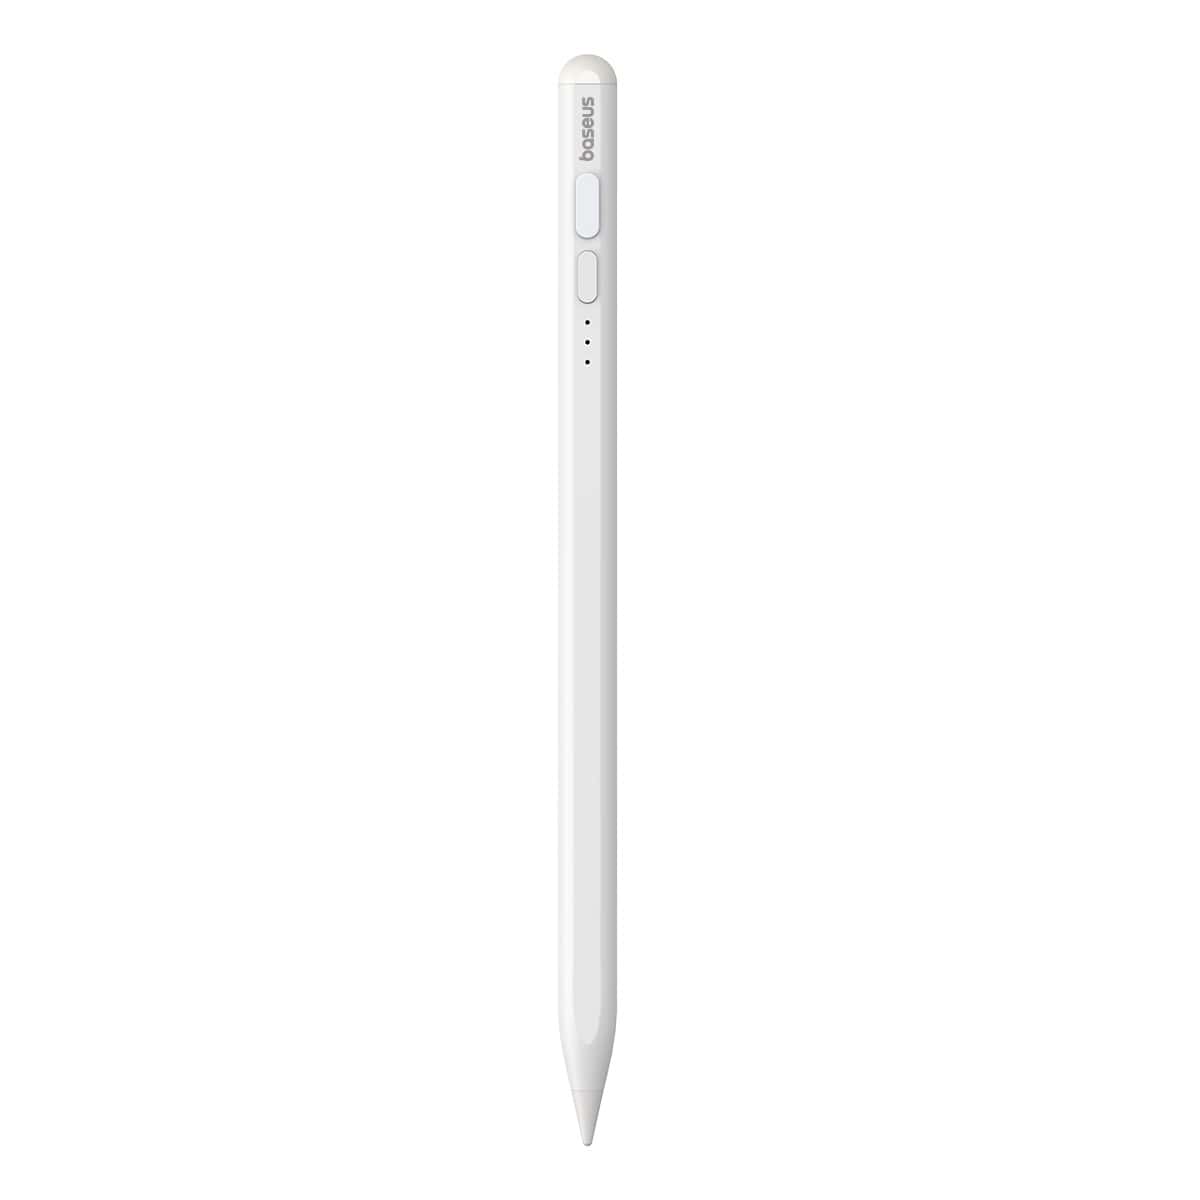 Baseus Smooth Writing 2 Series Stylus with LED Indicators, Moon White(Active version with type-C cable and active pen tip)